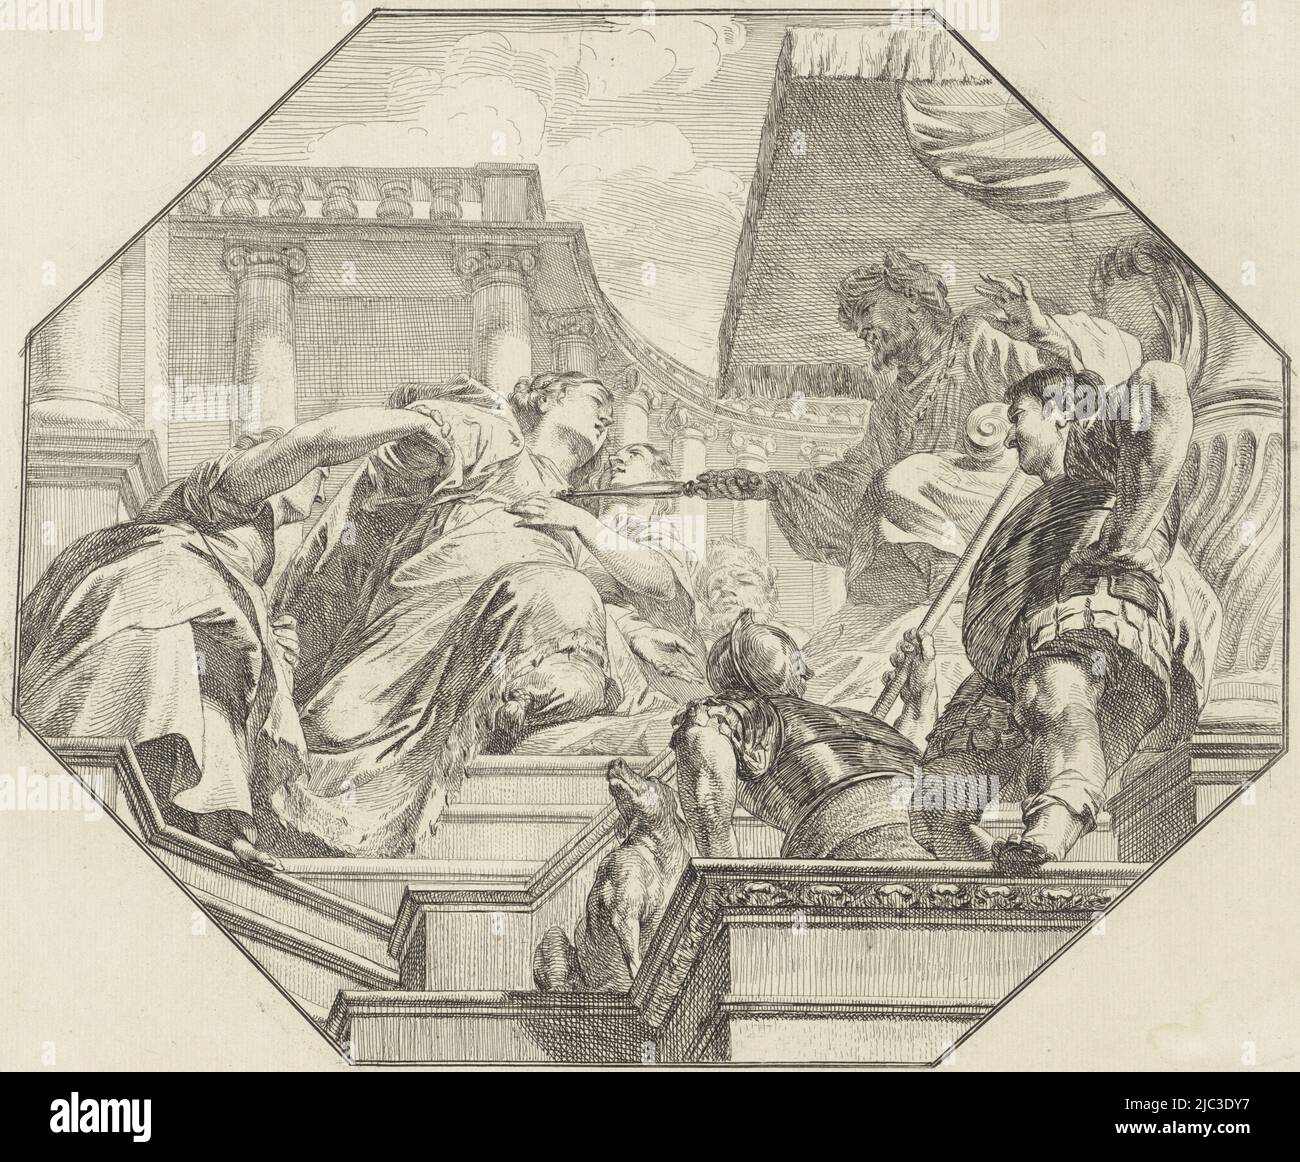 King Ahasuerus touches Esther, who is kneeling before him, with his scepter. Depiction of the Bible text Esther 15:12., Esther before King Ahasuerus, print maker: Jacob de Wit, after: Peter Paul Rubens, Amsterdam, 1705 - 1754, paper, etching, h 336 mm × w 401 mm Stock Photo